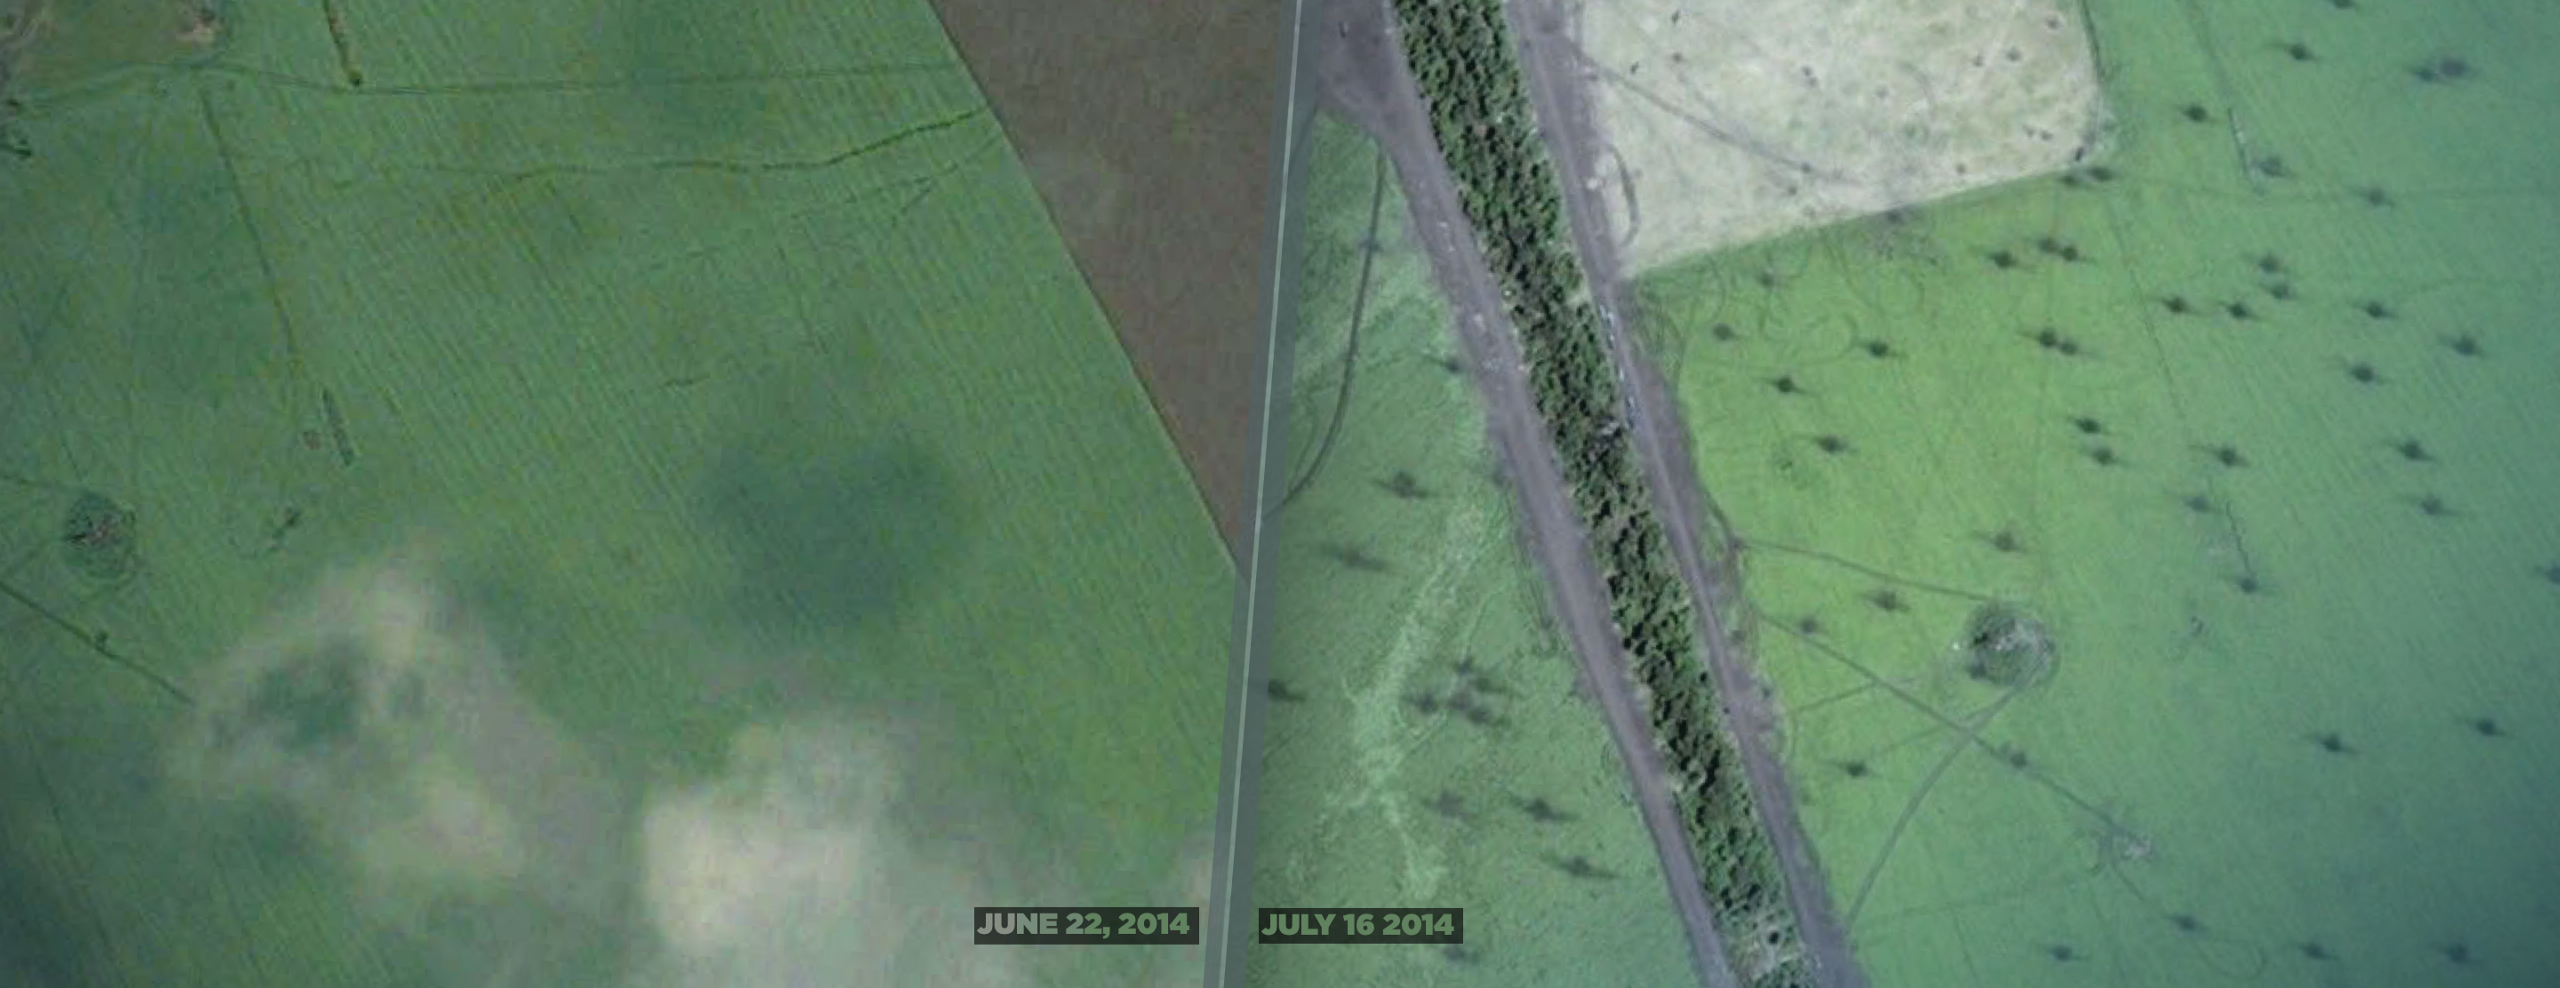 A Brief History of the Ukrainian Conflict, from the Sky: Part I